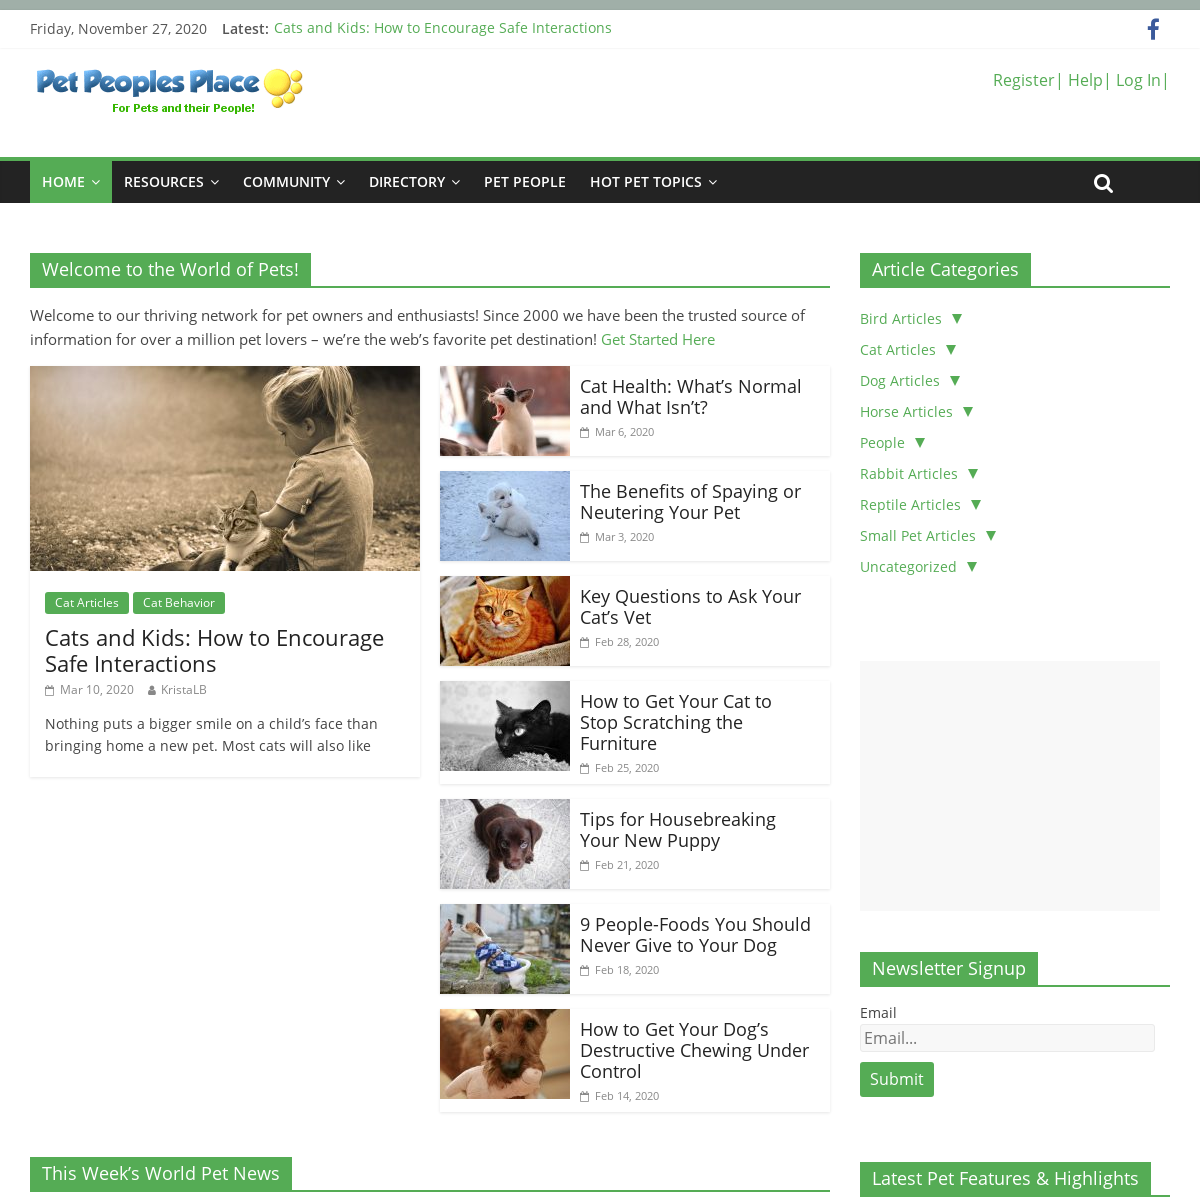 A complete backup of petpeoplesplace.com